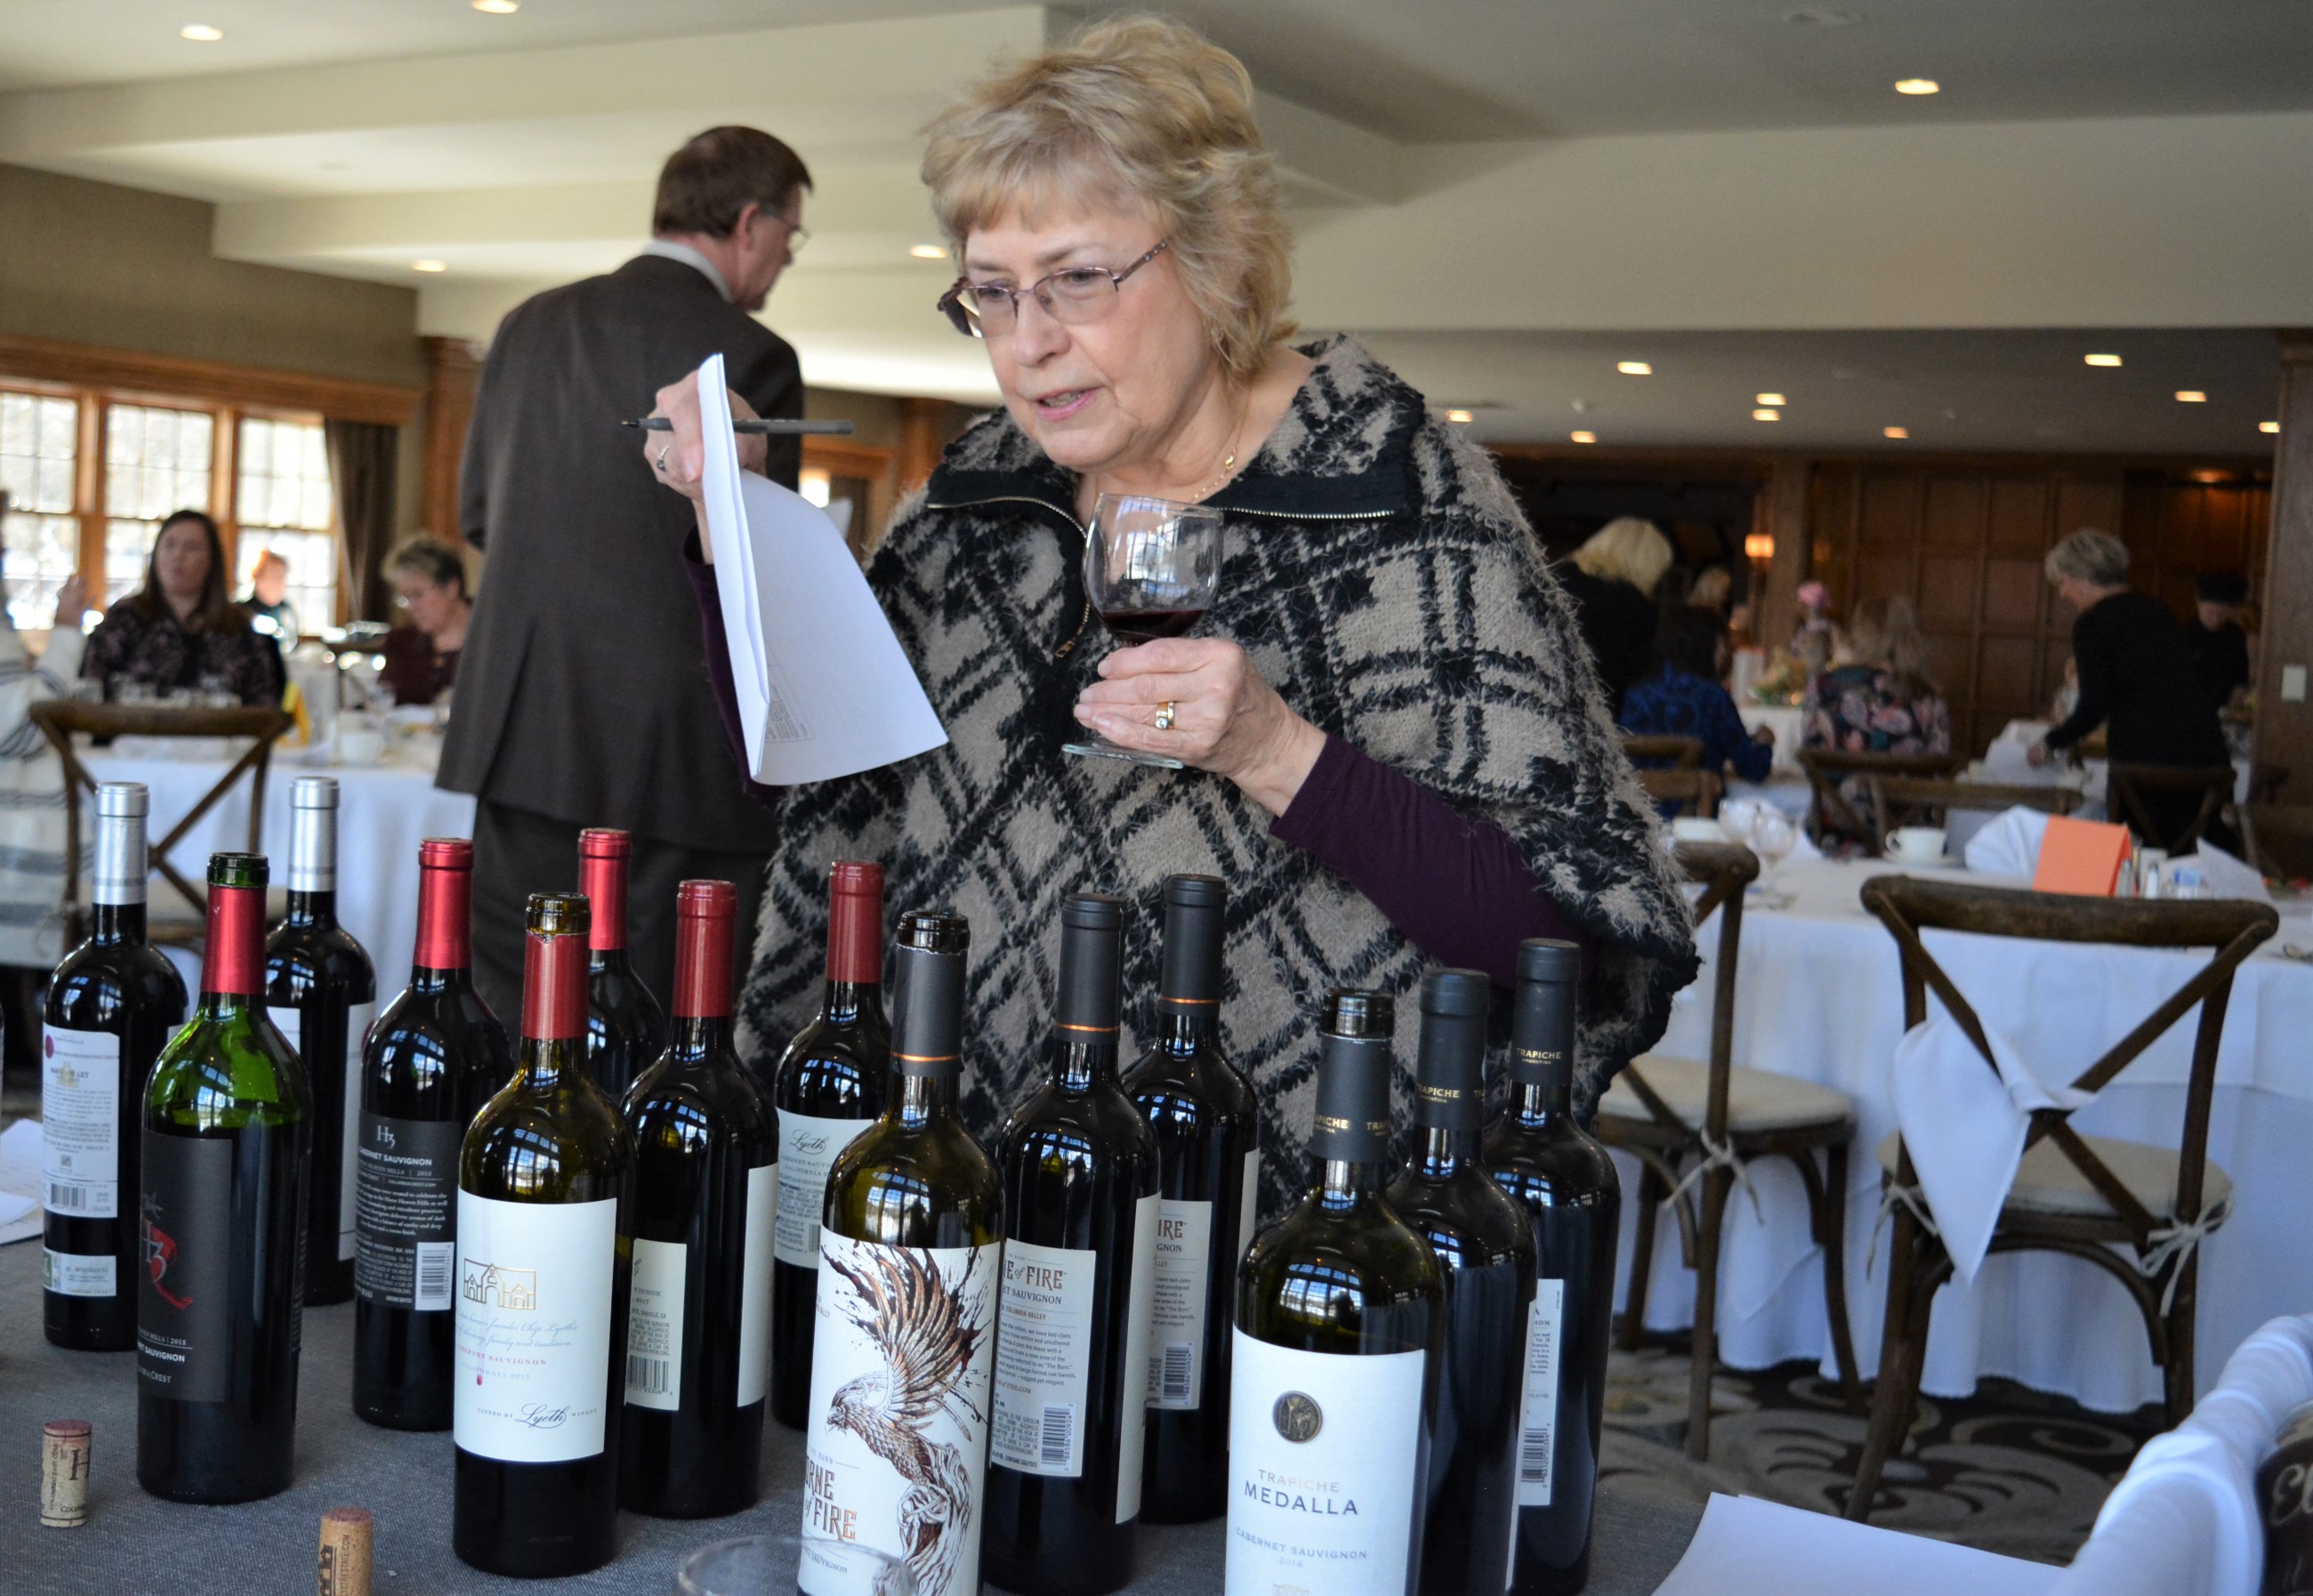 So much wine, so little time. Orion Twp. resident Janis Ripple checks out the diverse selection of red wines. Photo by C.J. Carnacchio.